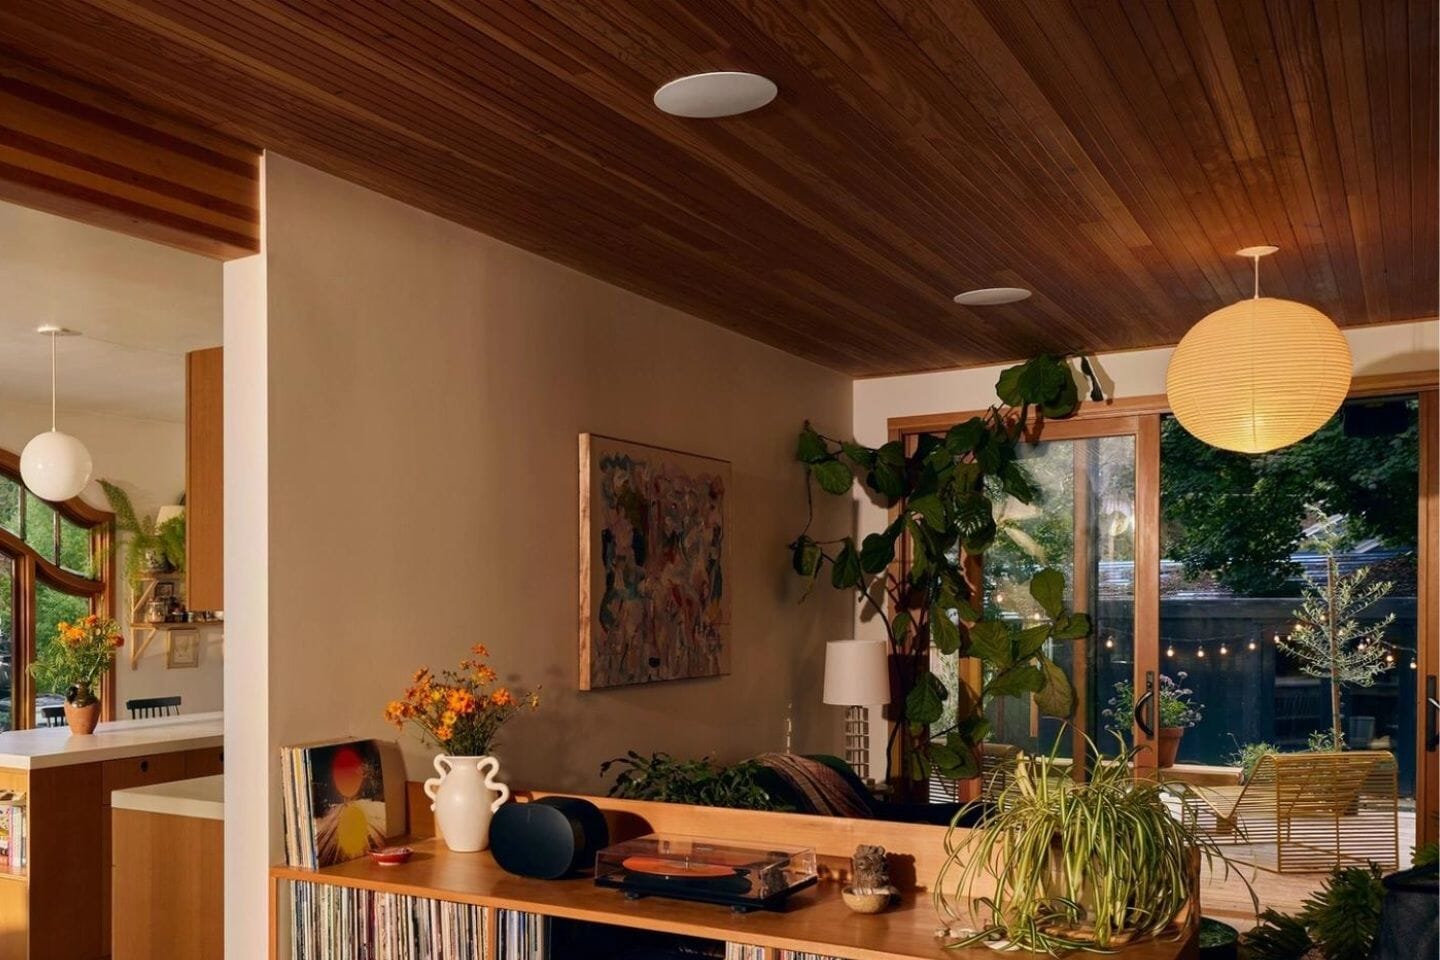 Things you might need to know before installing ceiling speakers in your home.